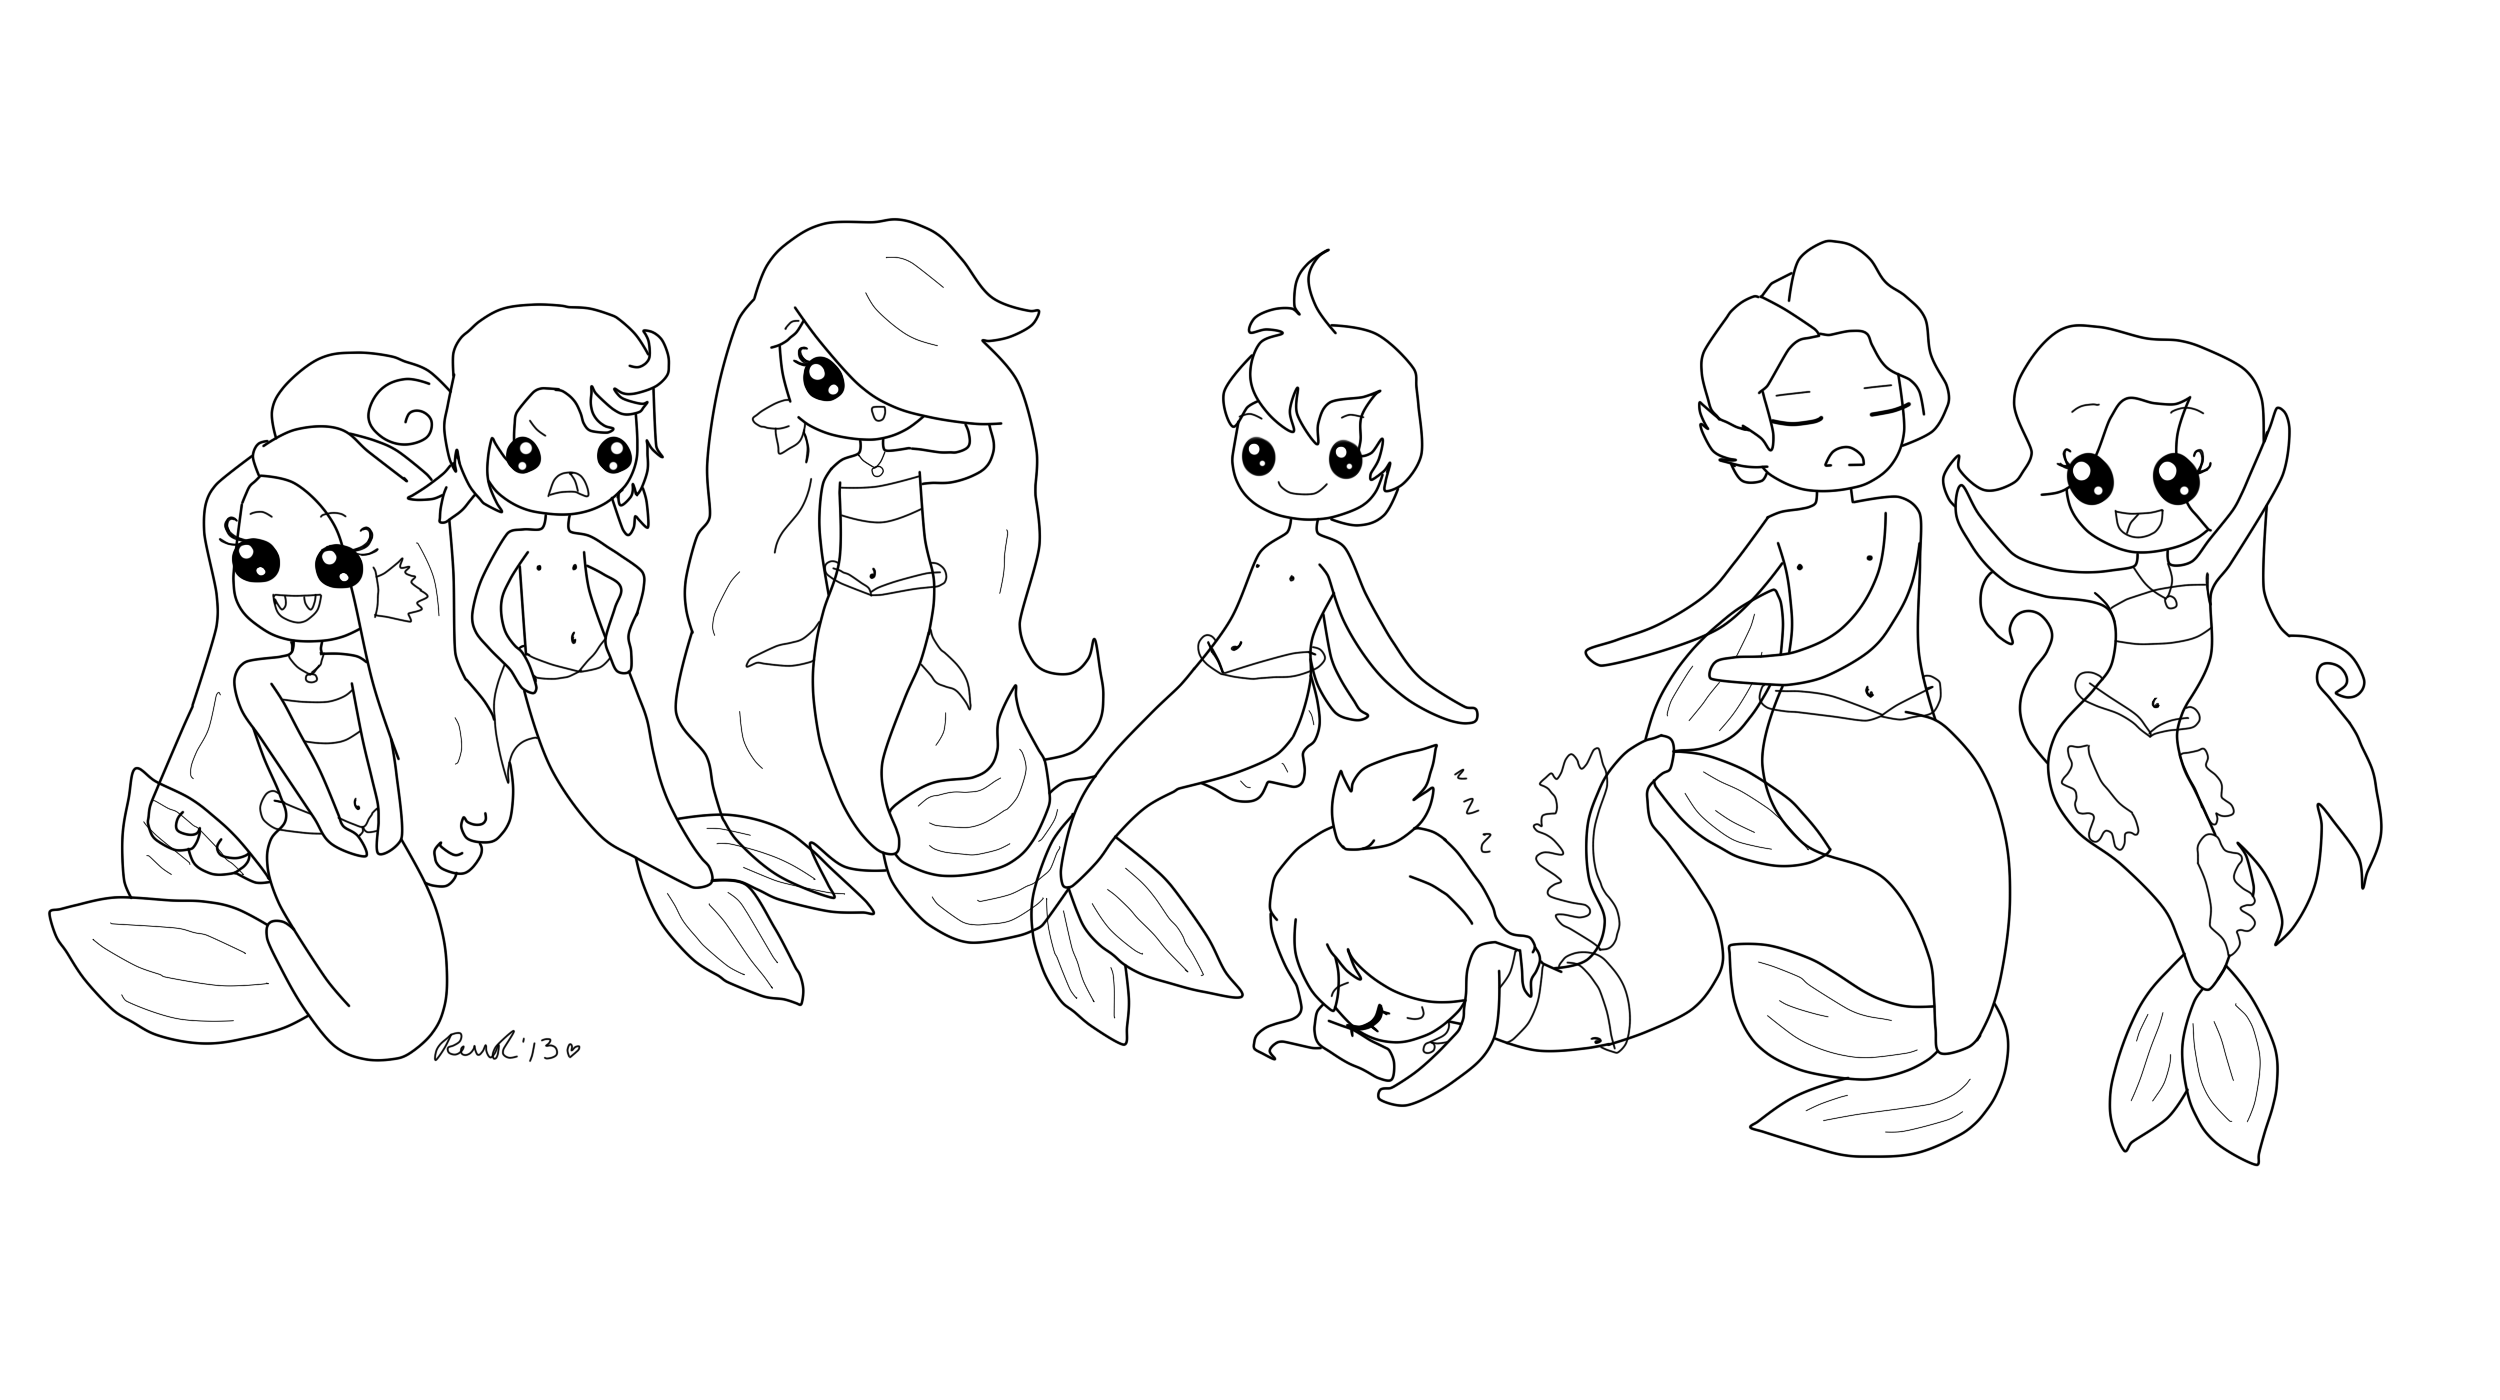 Anime Mermen Coloring Pages | Coloring Pages For All Ages